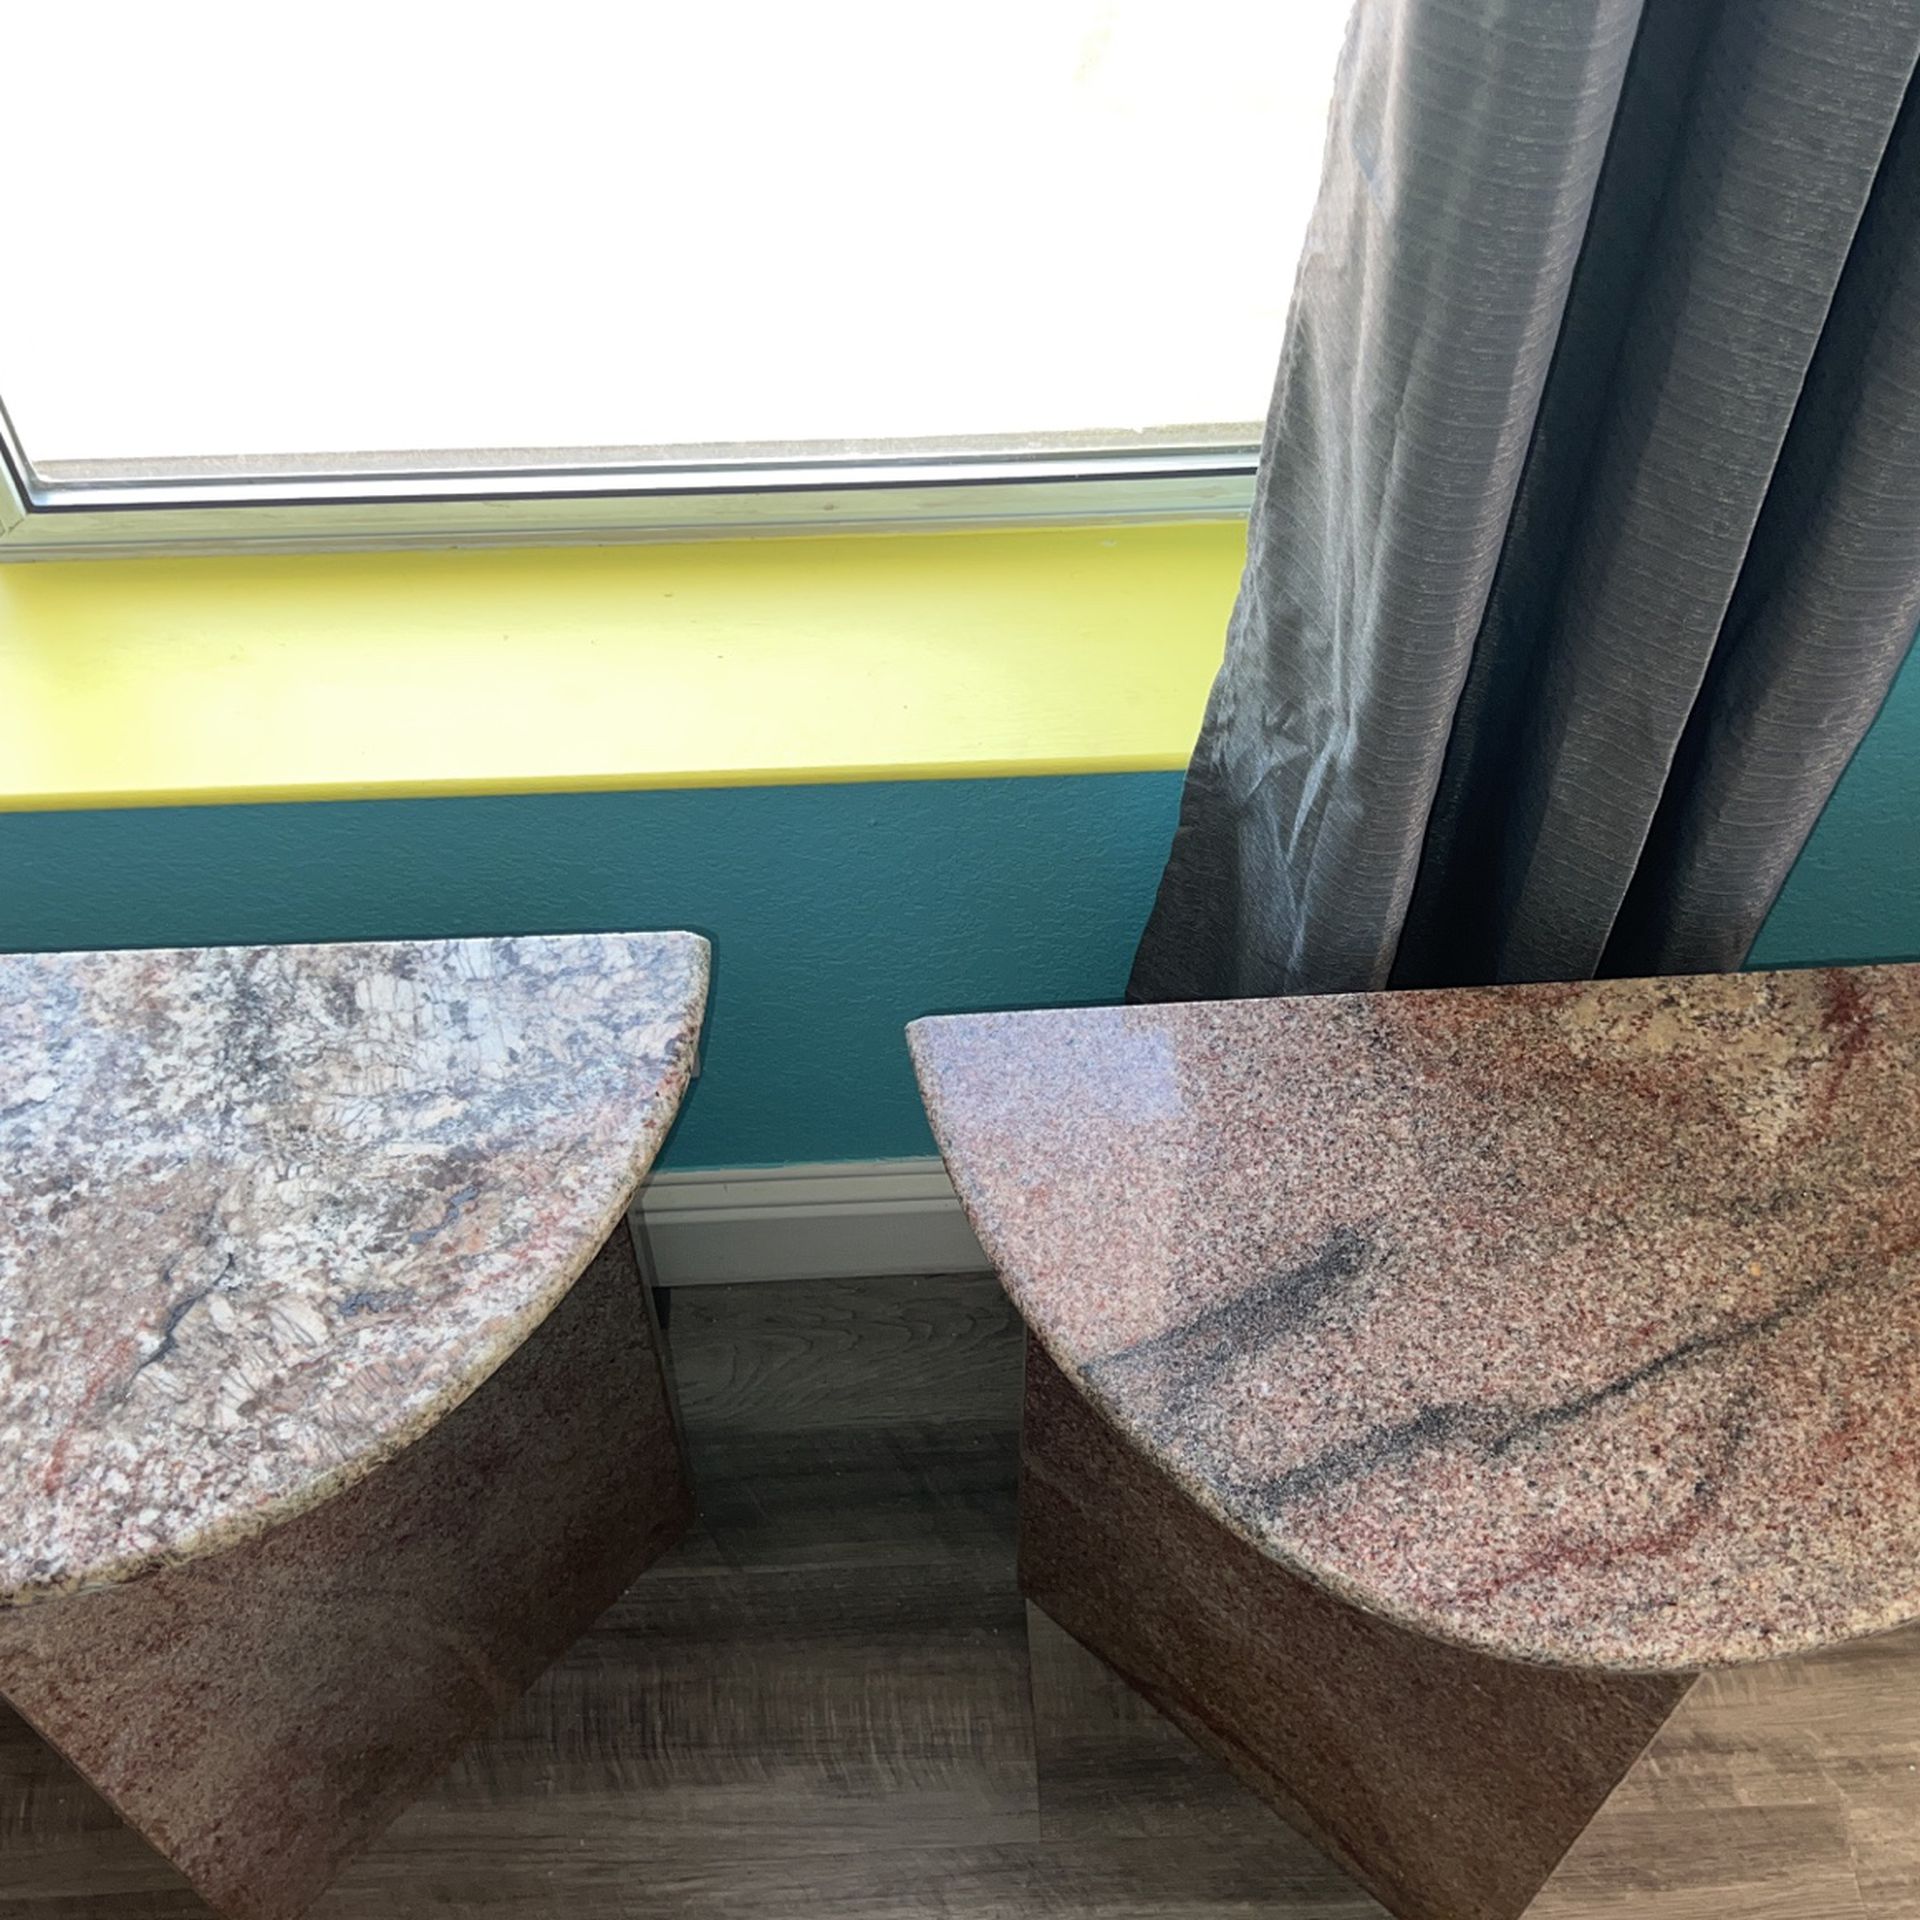 Beautiful Granite Wall Table for Sale in North Las Vegas, NV - OfferUp